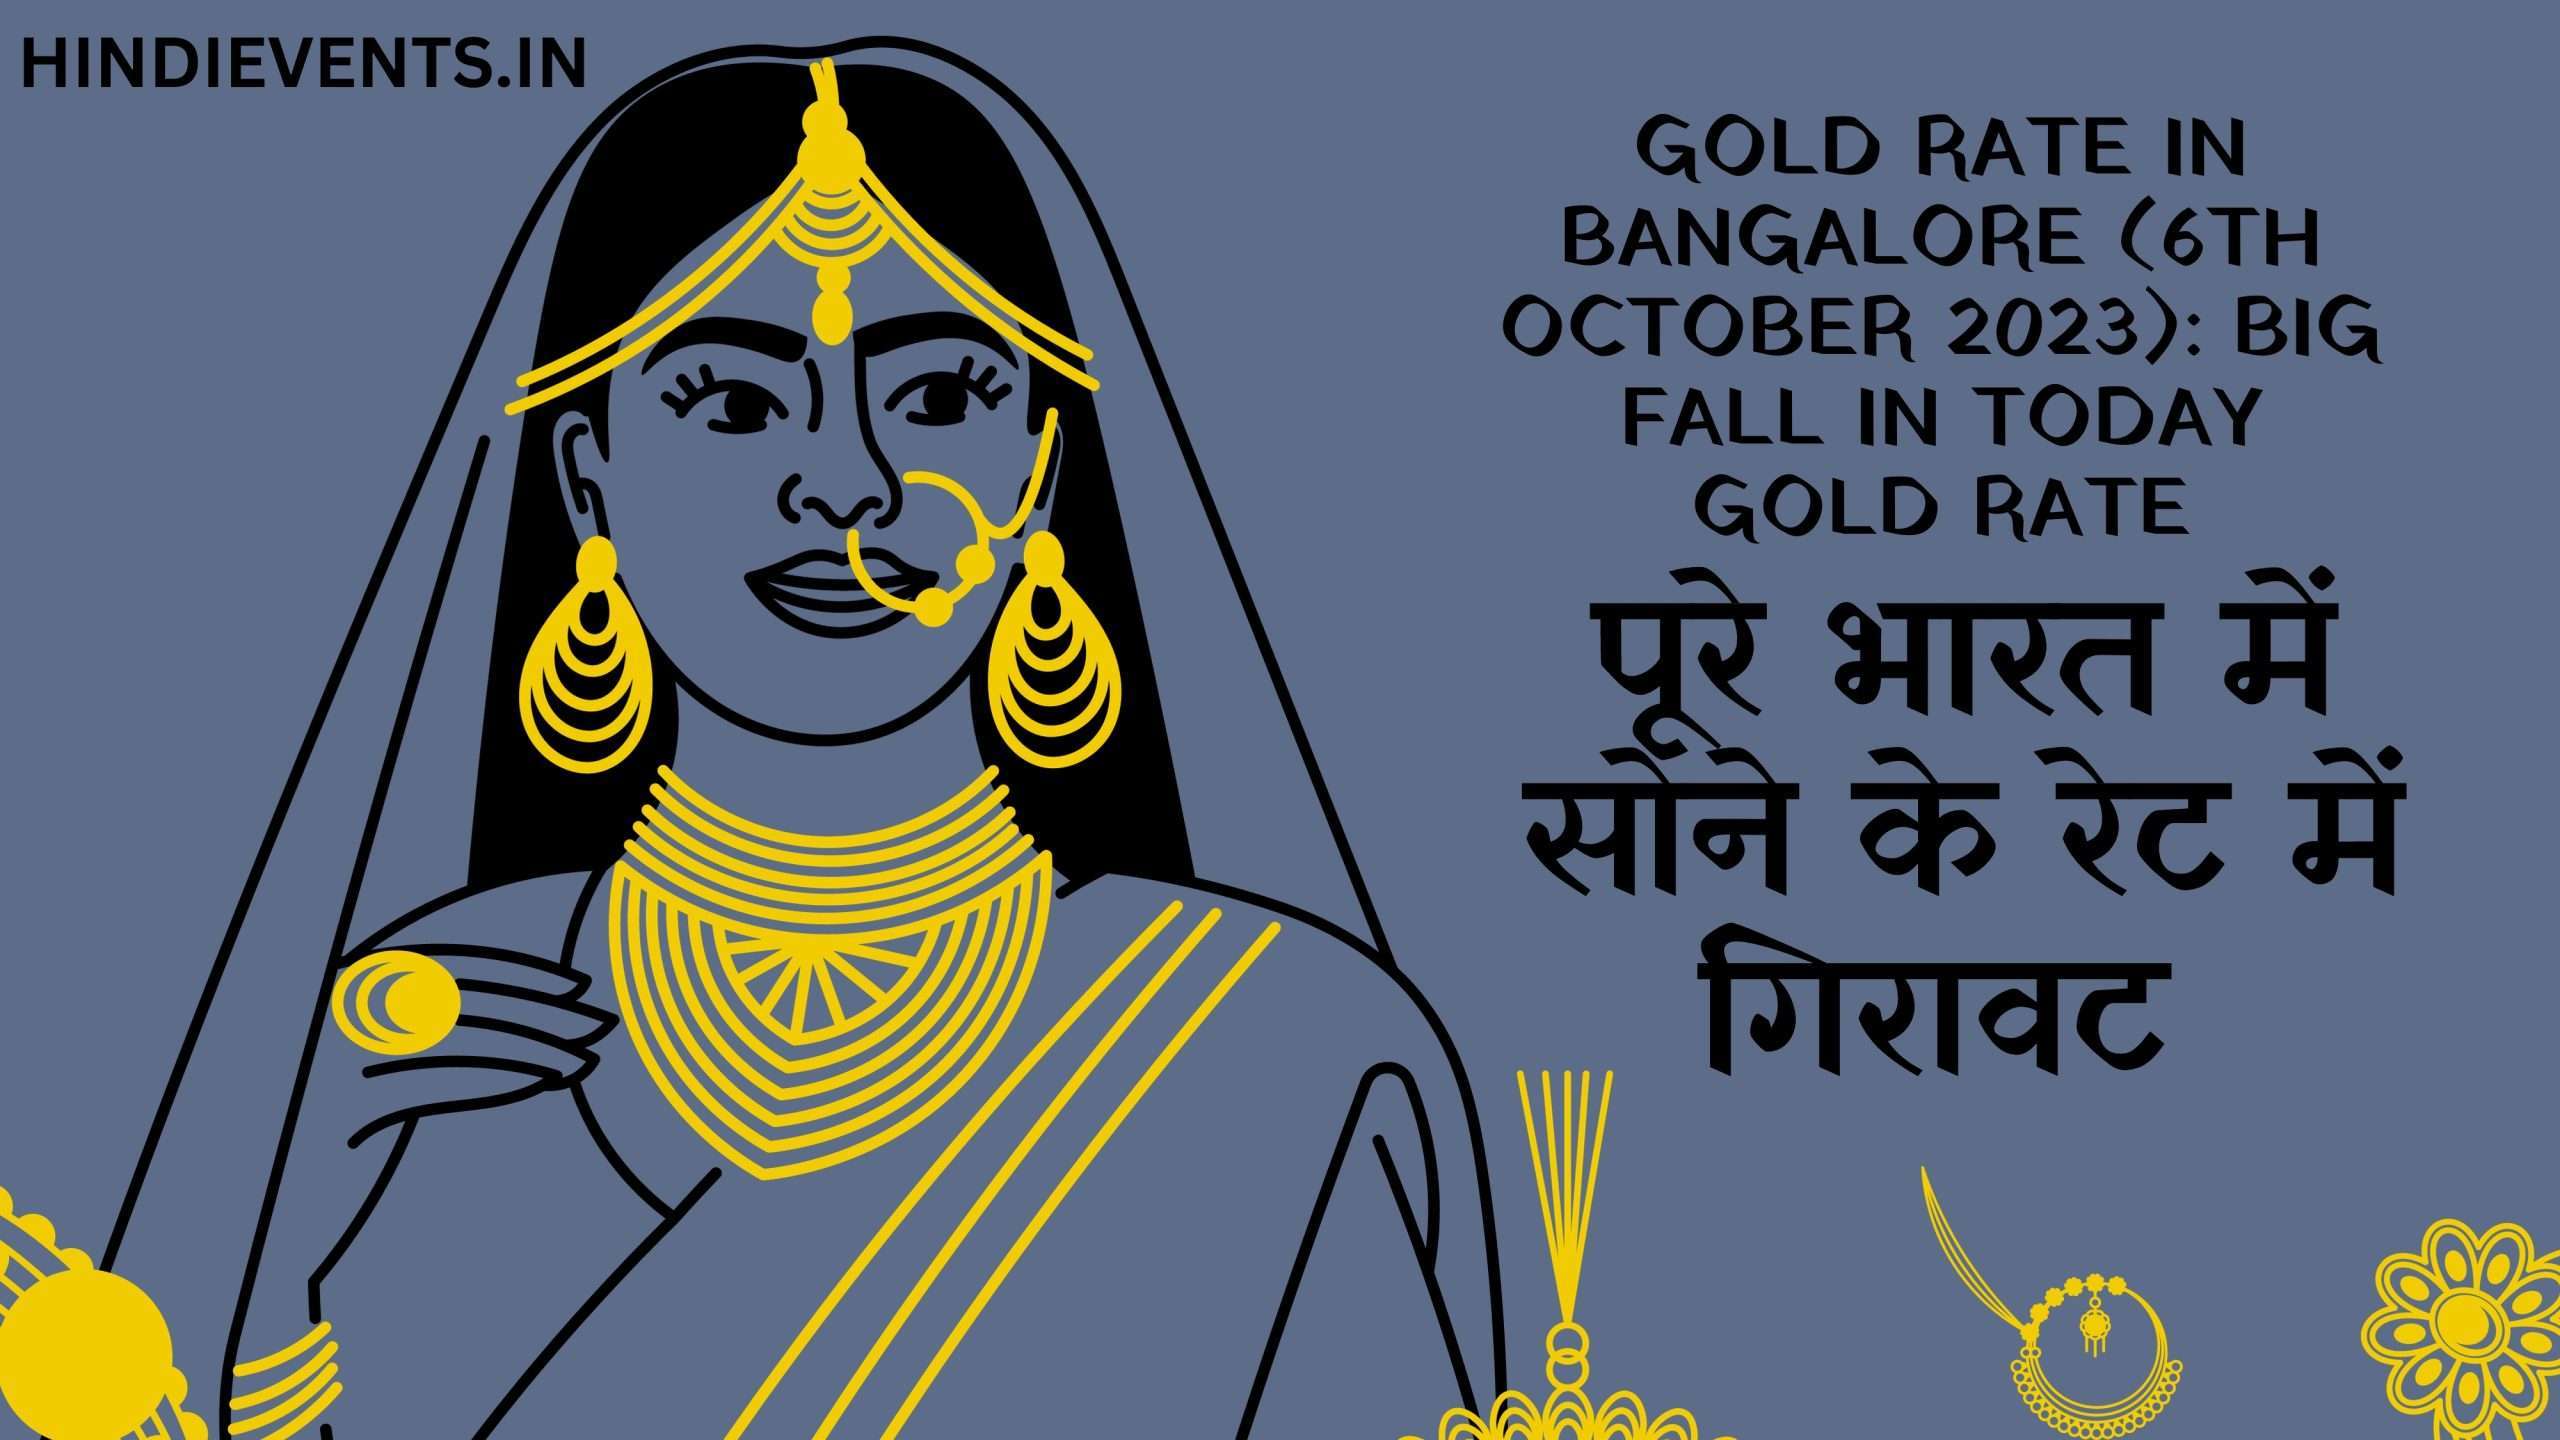 Big Fall In Today Gold Rate